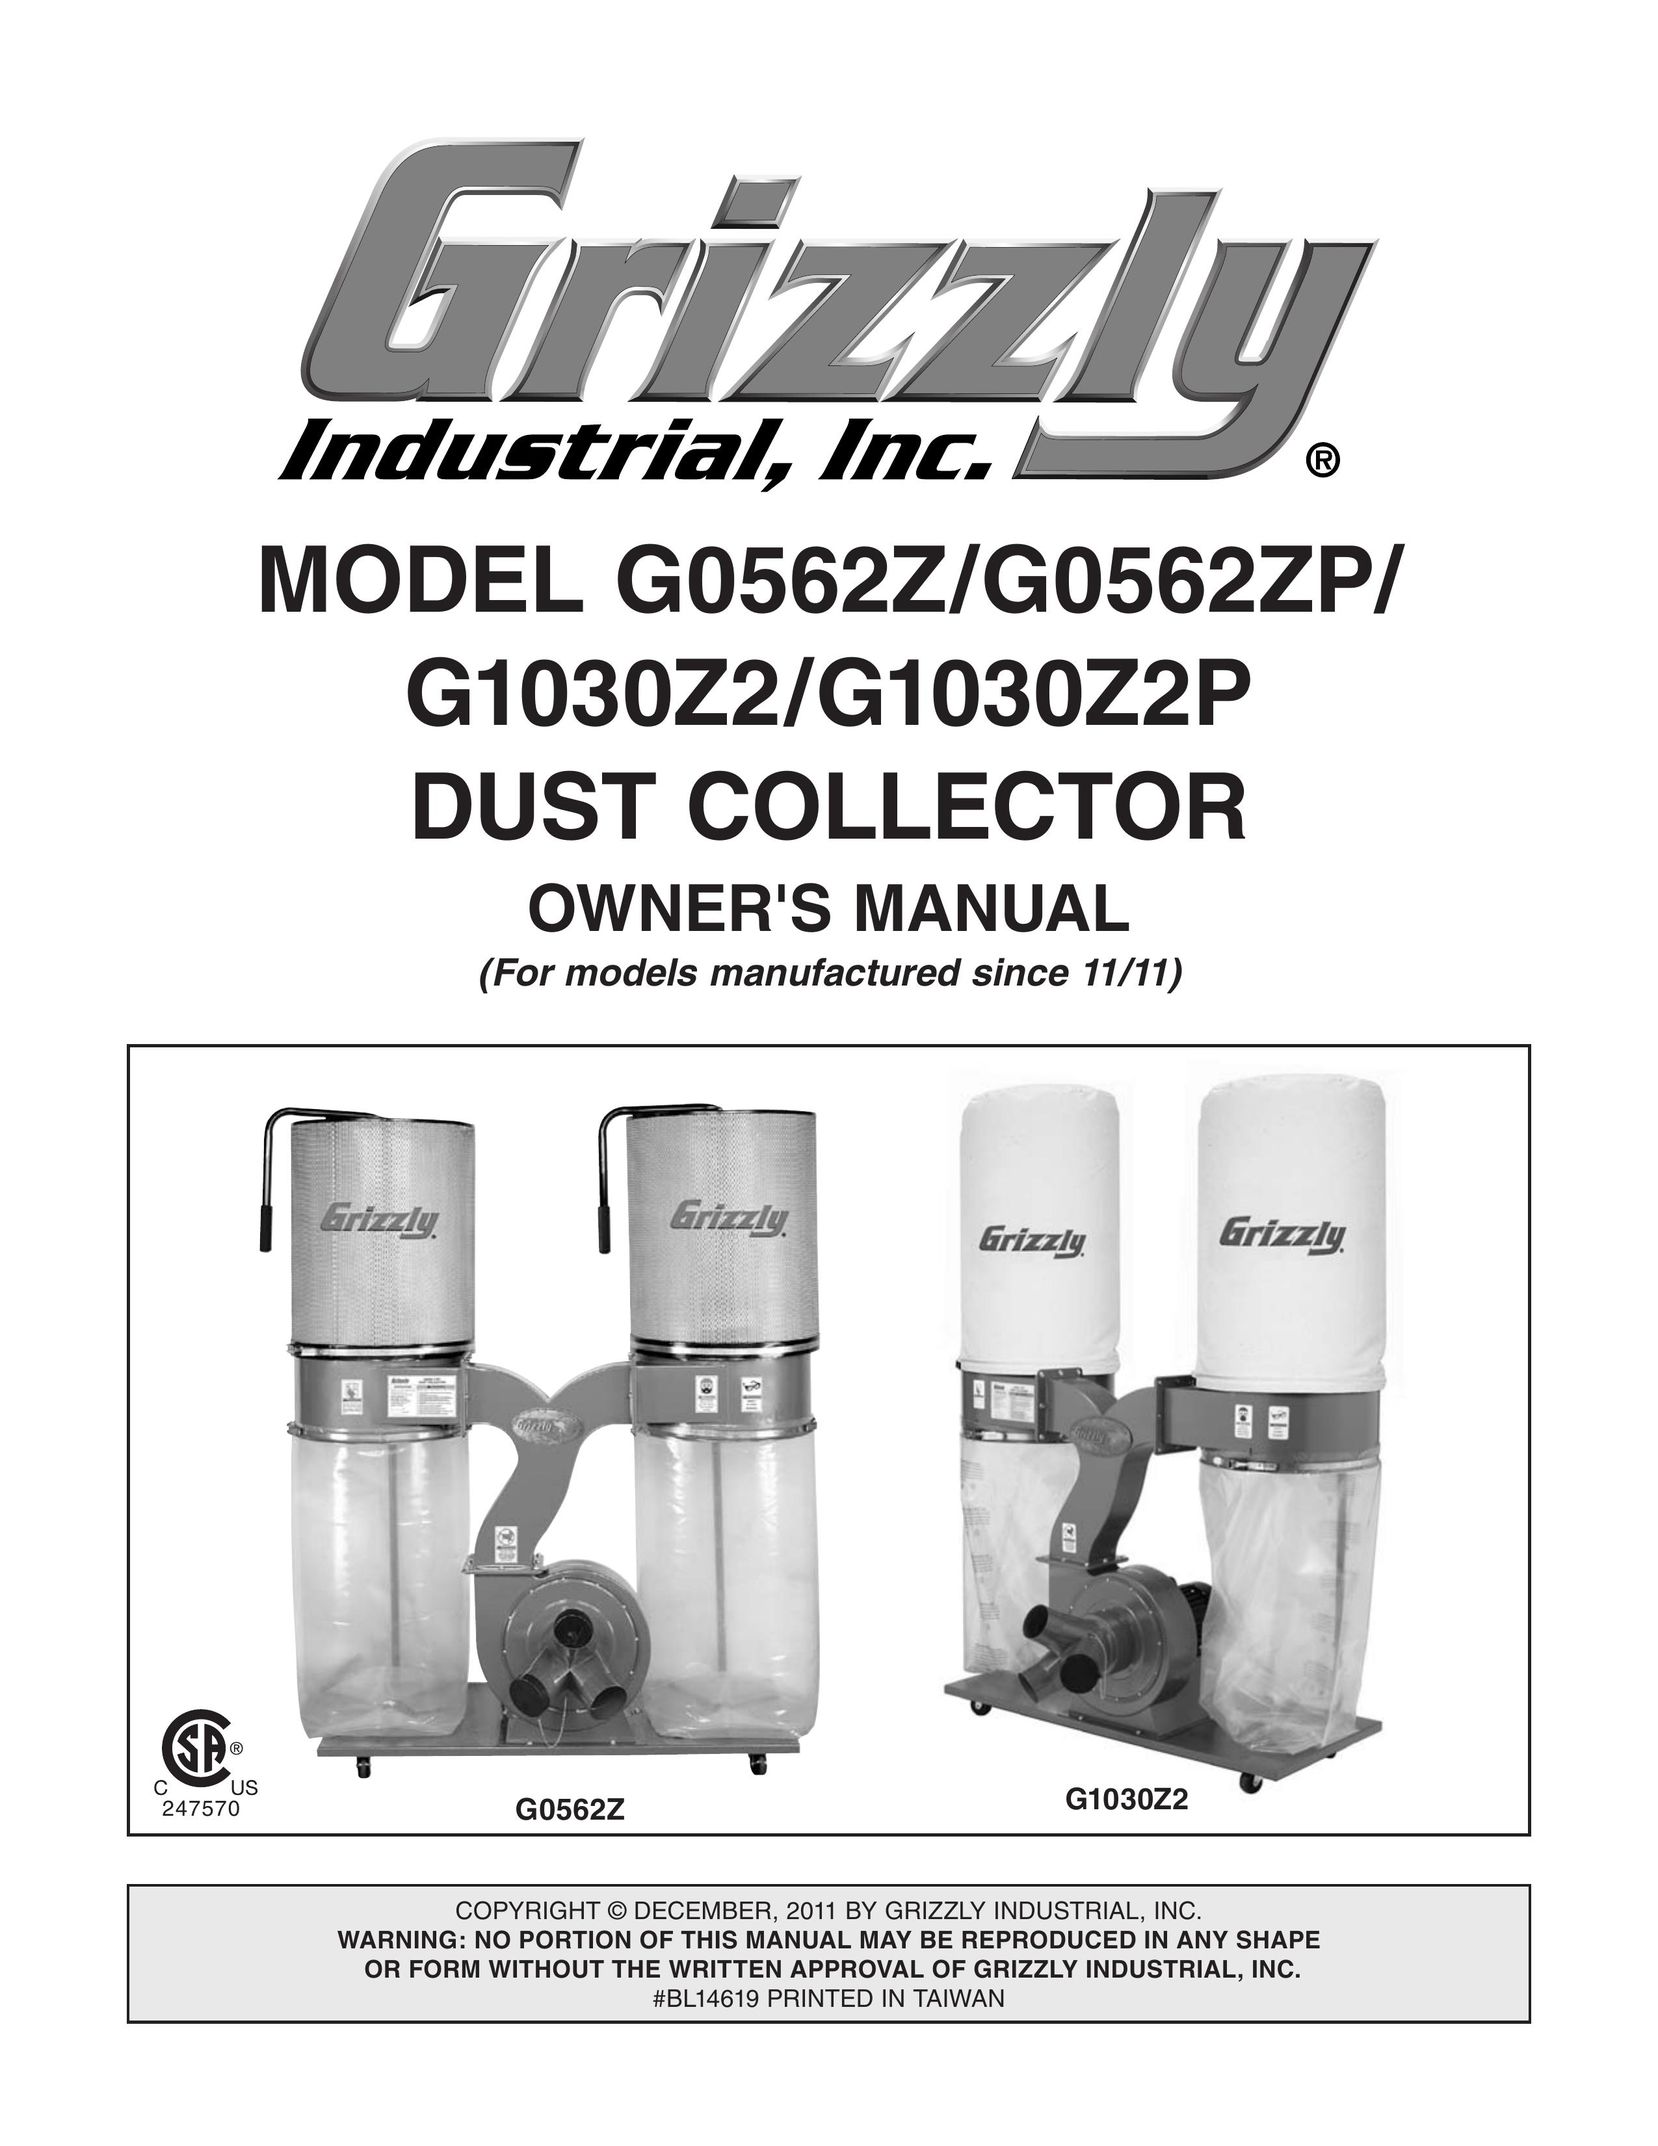 Grizzly G1030Z2 Dust Collector User Manual